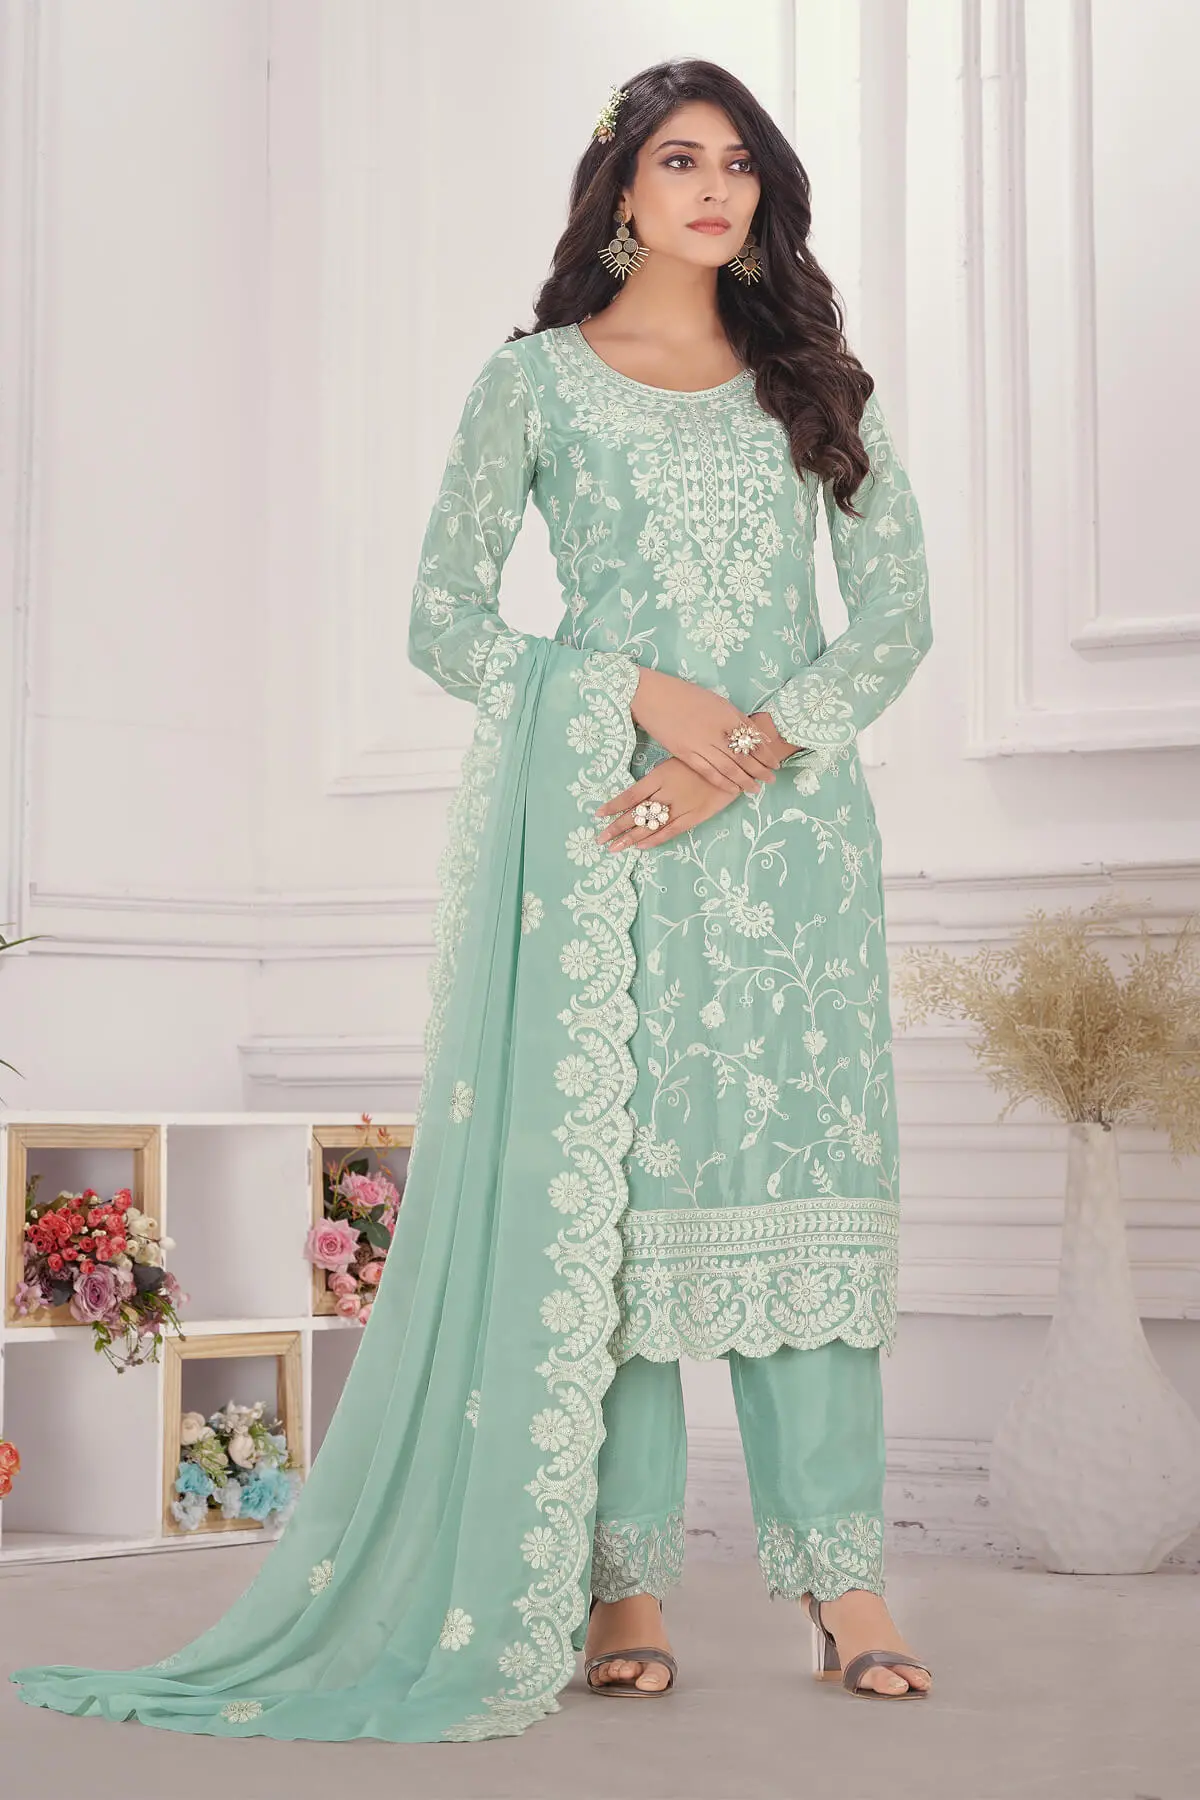 Pakistani Pant Suits Embroidered online in Canada USA UK Australia New Zealand France Mauritius